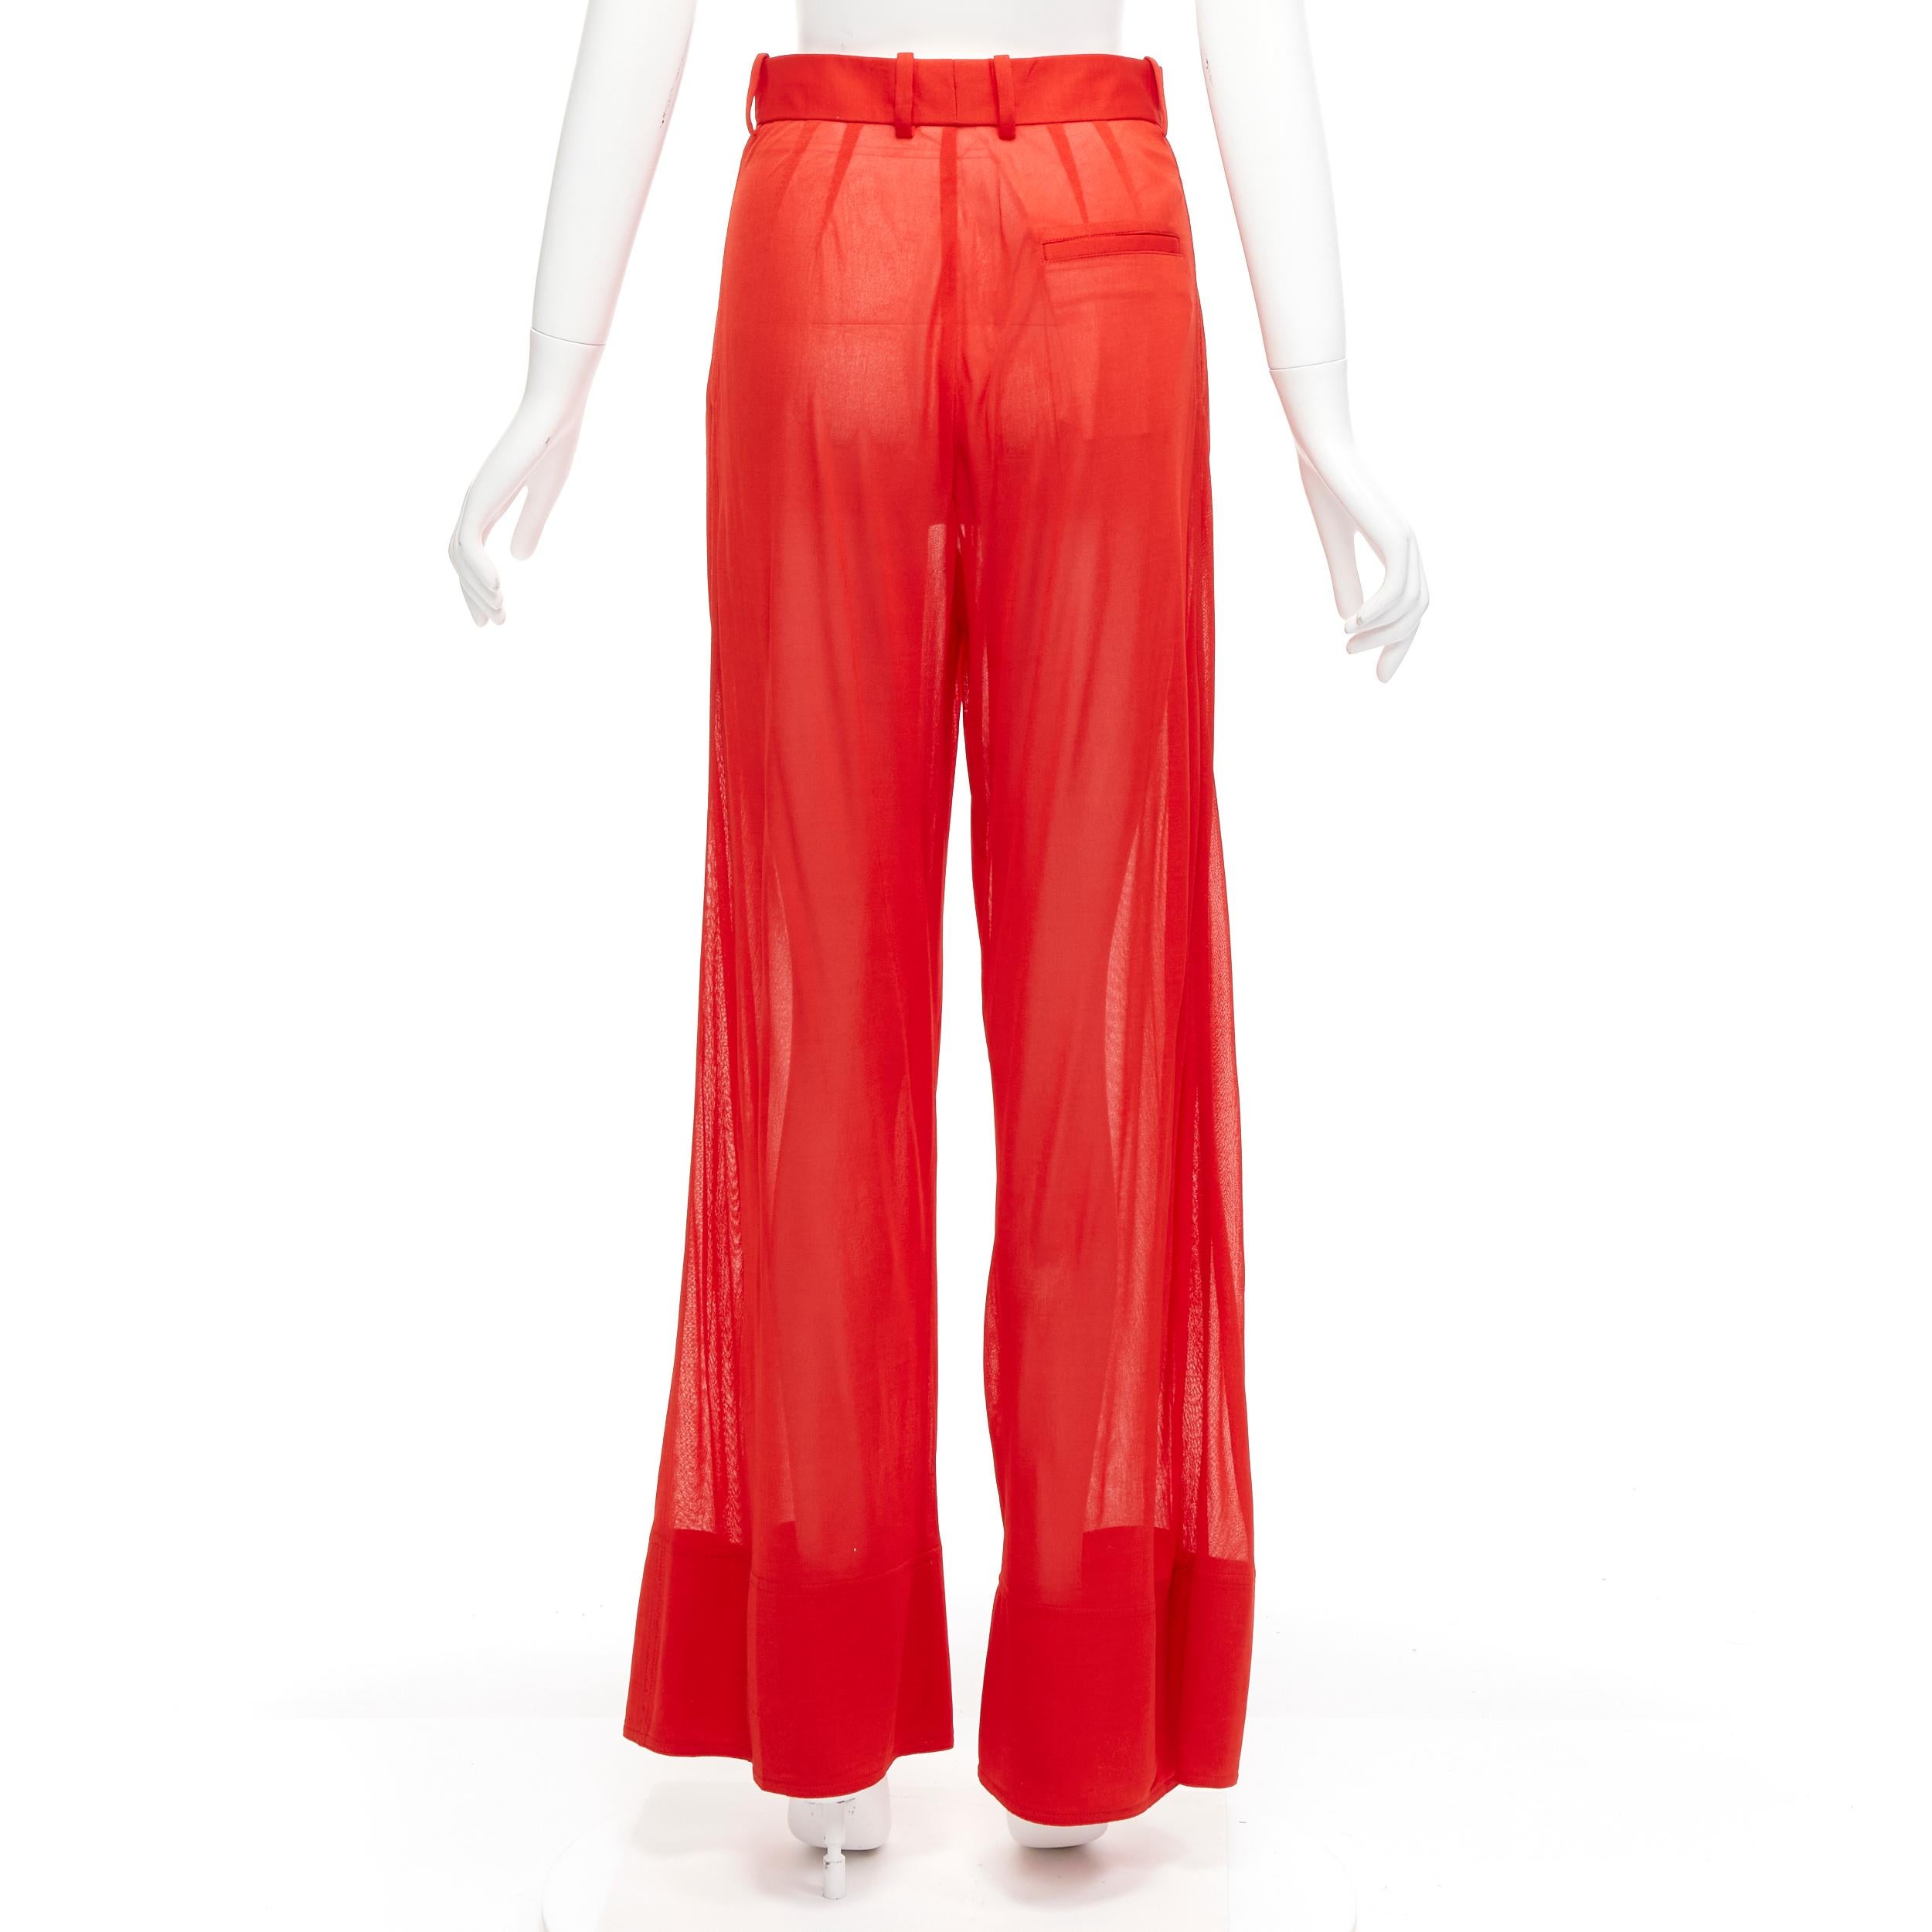 Women's OLD CELINE Phoebe Philo red sheer solid seam wide leg pants FR36 S For Sale